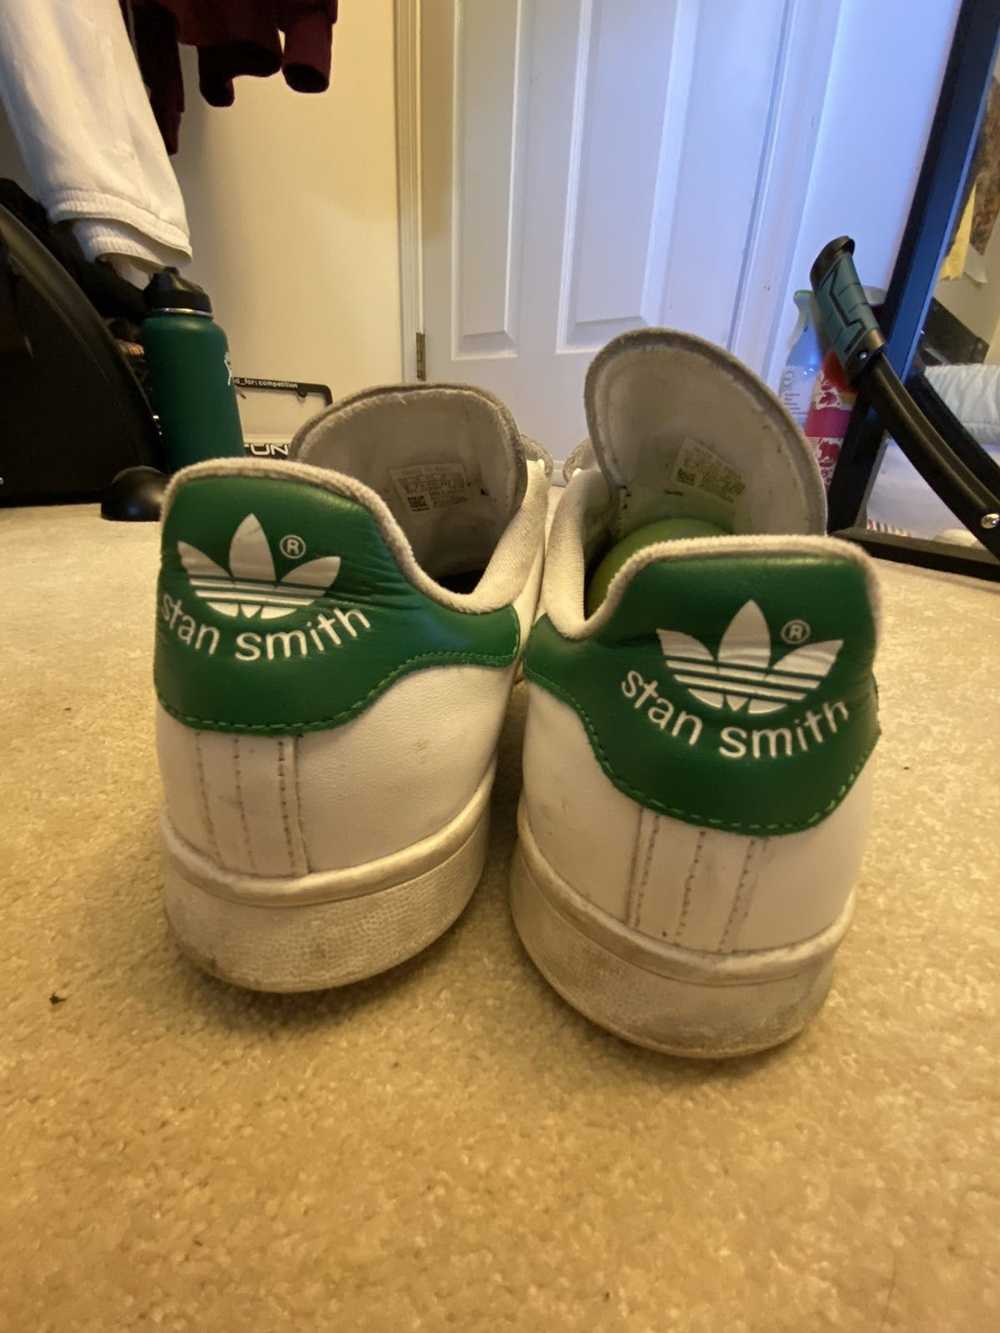 Mresneakers - Adidas stan smith / supreme LV. made for a friend and his  kid, not my design.